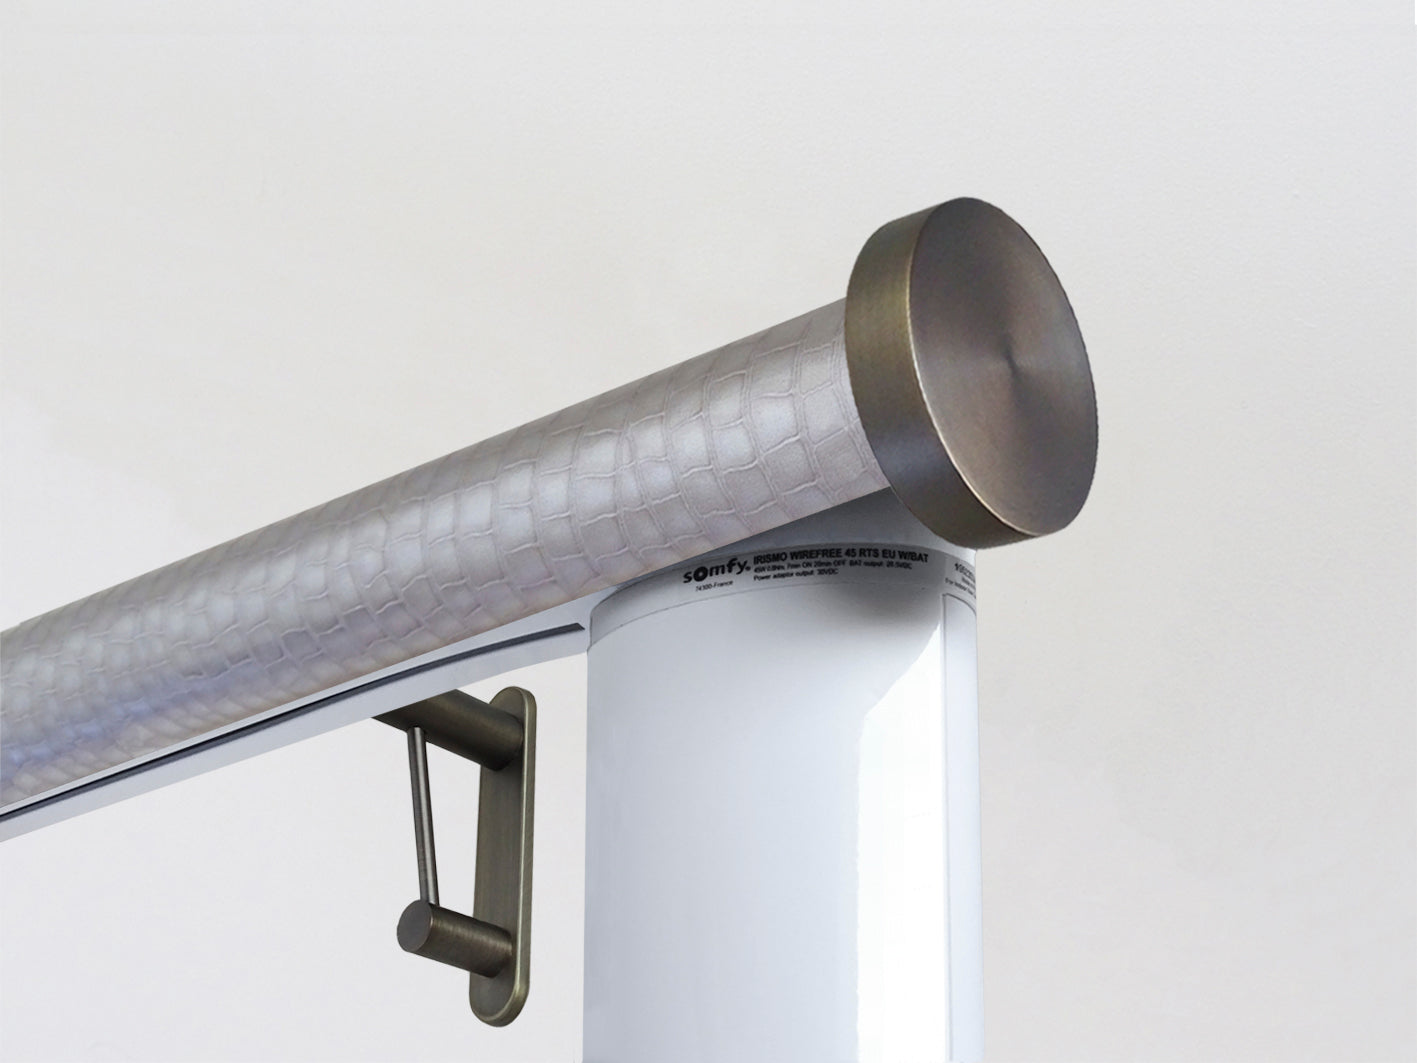 Motorised electric curtain pole in rose pewter grey, wireless & battery powered using the Somfy Glydea track | Walcot House UK curtain pole specialists